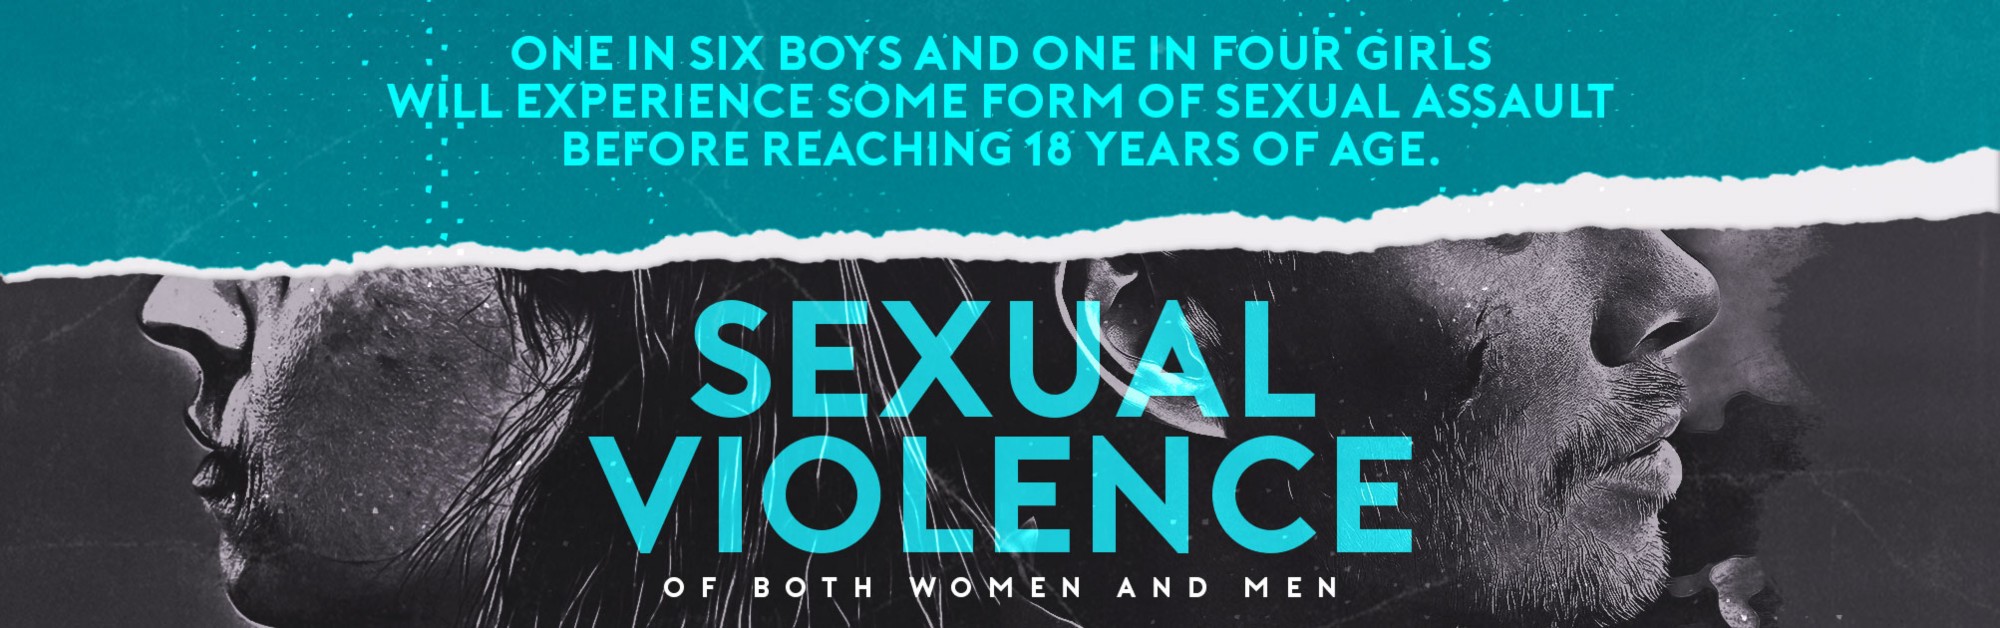 Sex Video Hd Download 18years - Sexual Violence - NCOSE